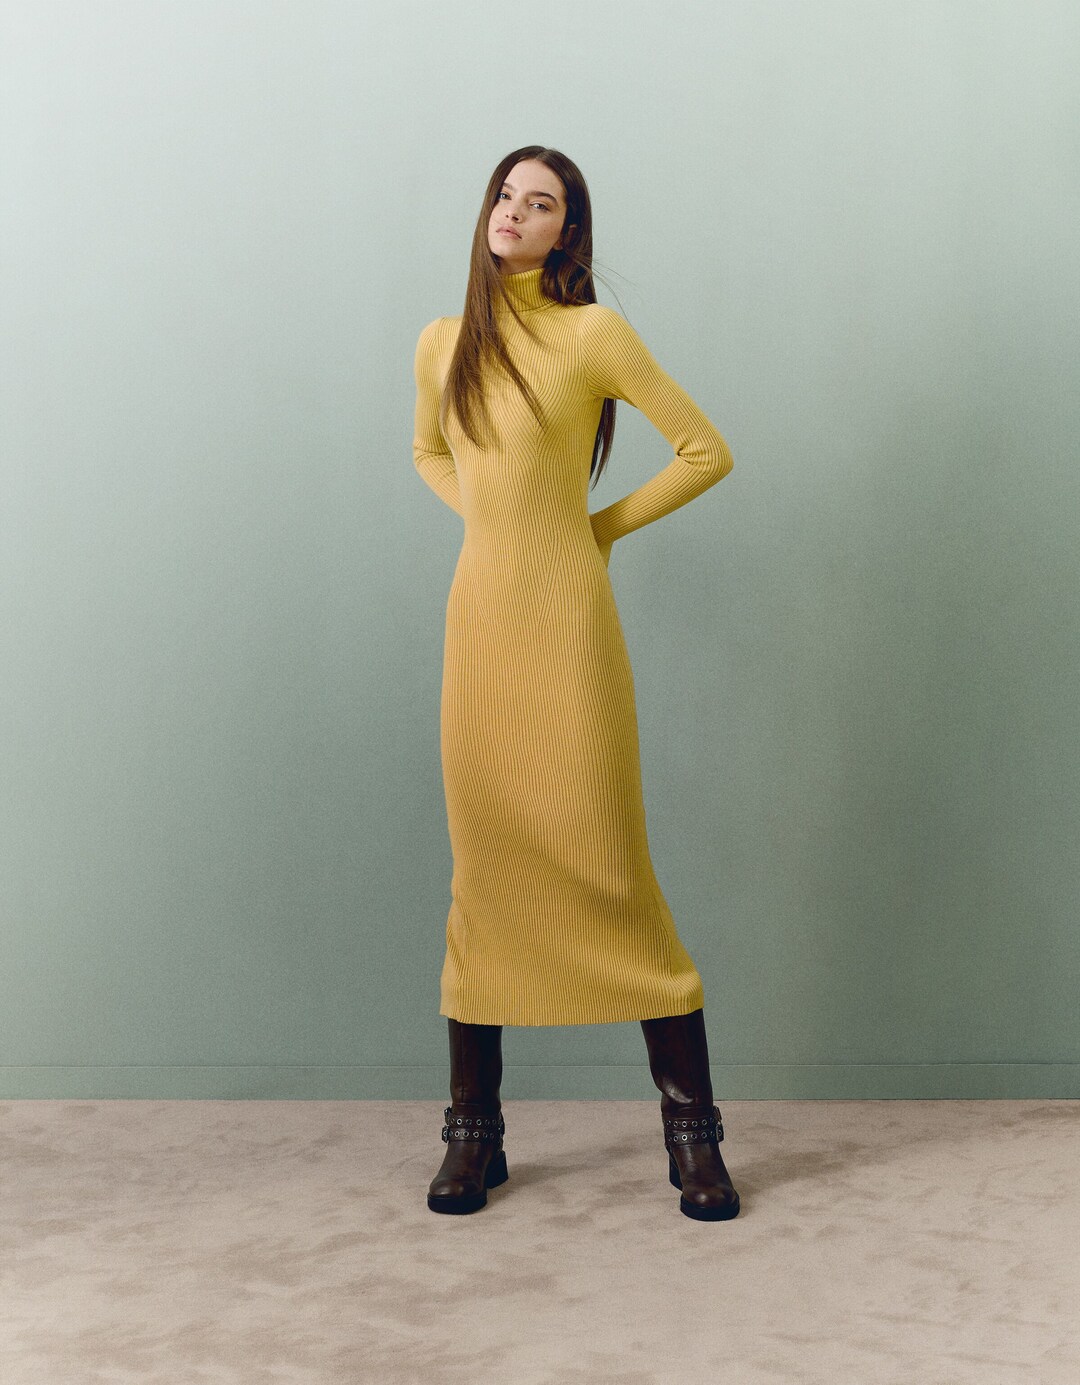 Ribbed knit midi dress with long sleeves and high neck with slits